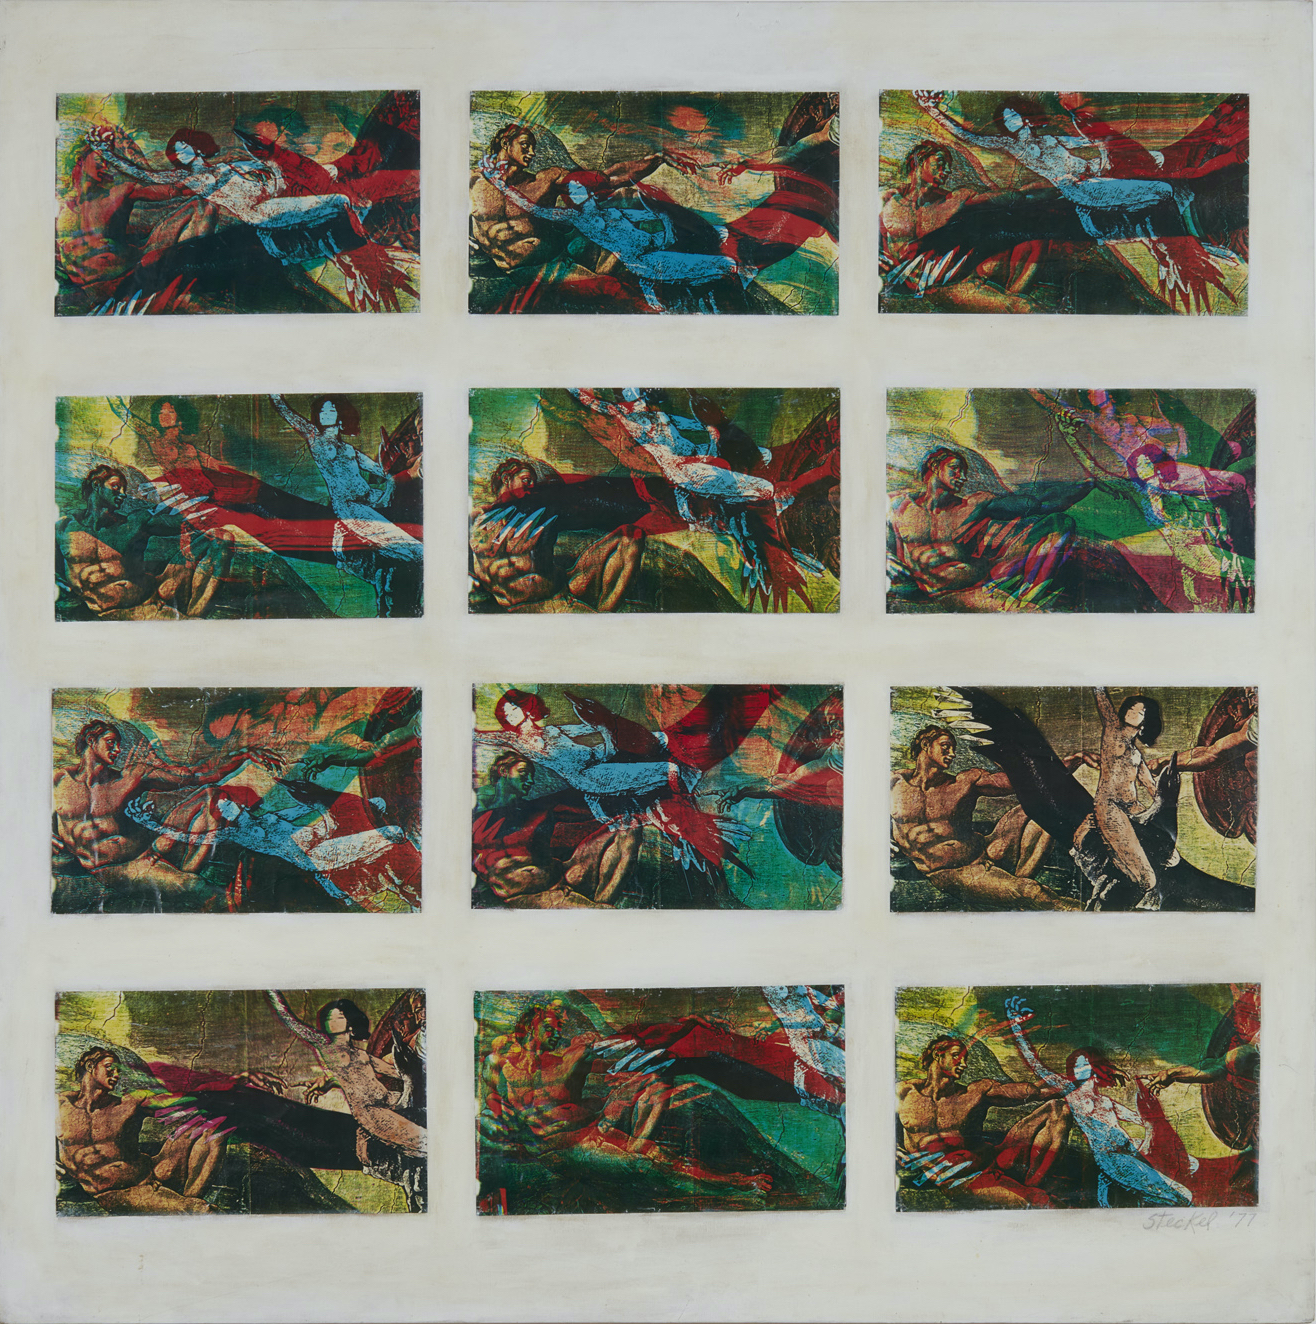 Single sheet with twelve colorful renditions of Michelangelo's "Creation of Man" (or "The Creation") arranged in a grid. Each version is altered in some way to include the figure of a nude woman.